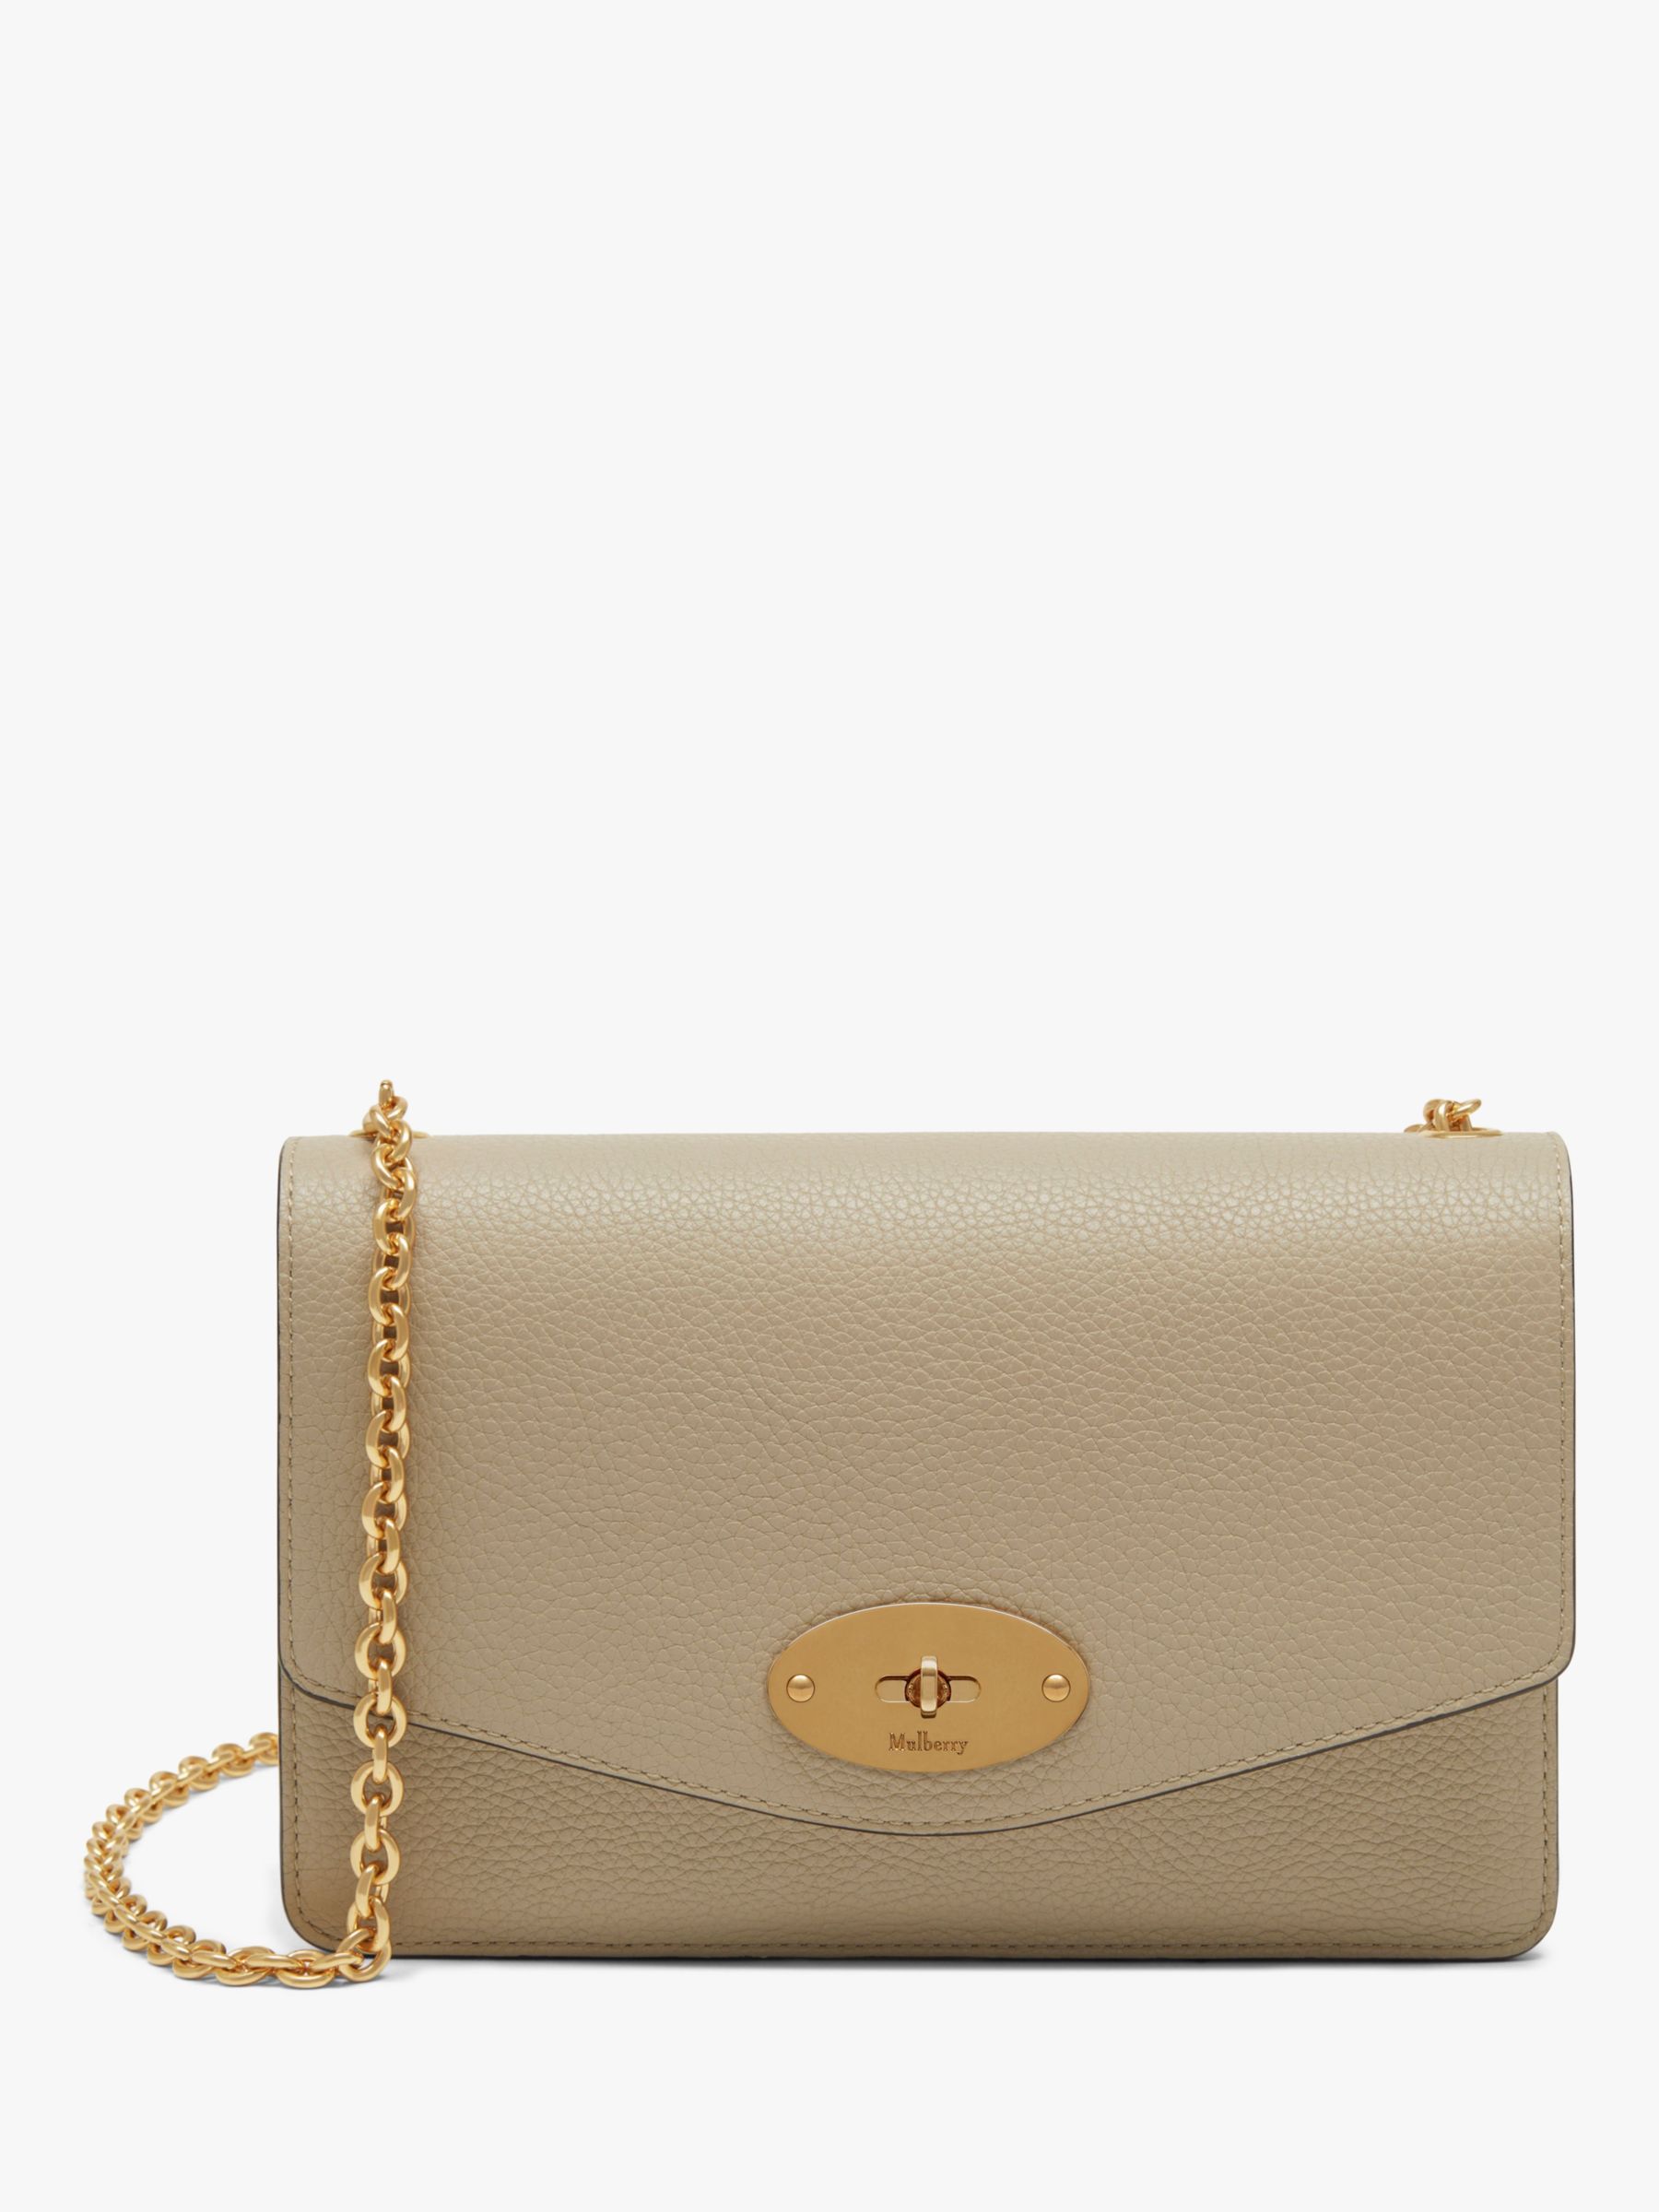 Mulberry Darley Small Classic Grain Leather Cross Body Bag at John ...